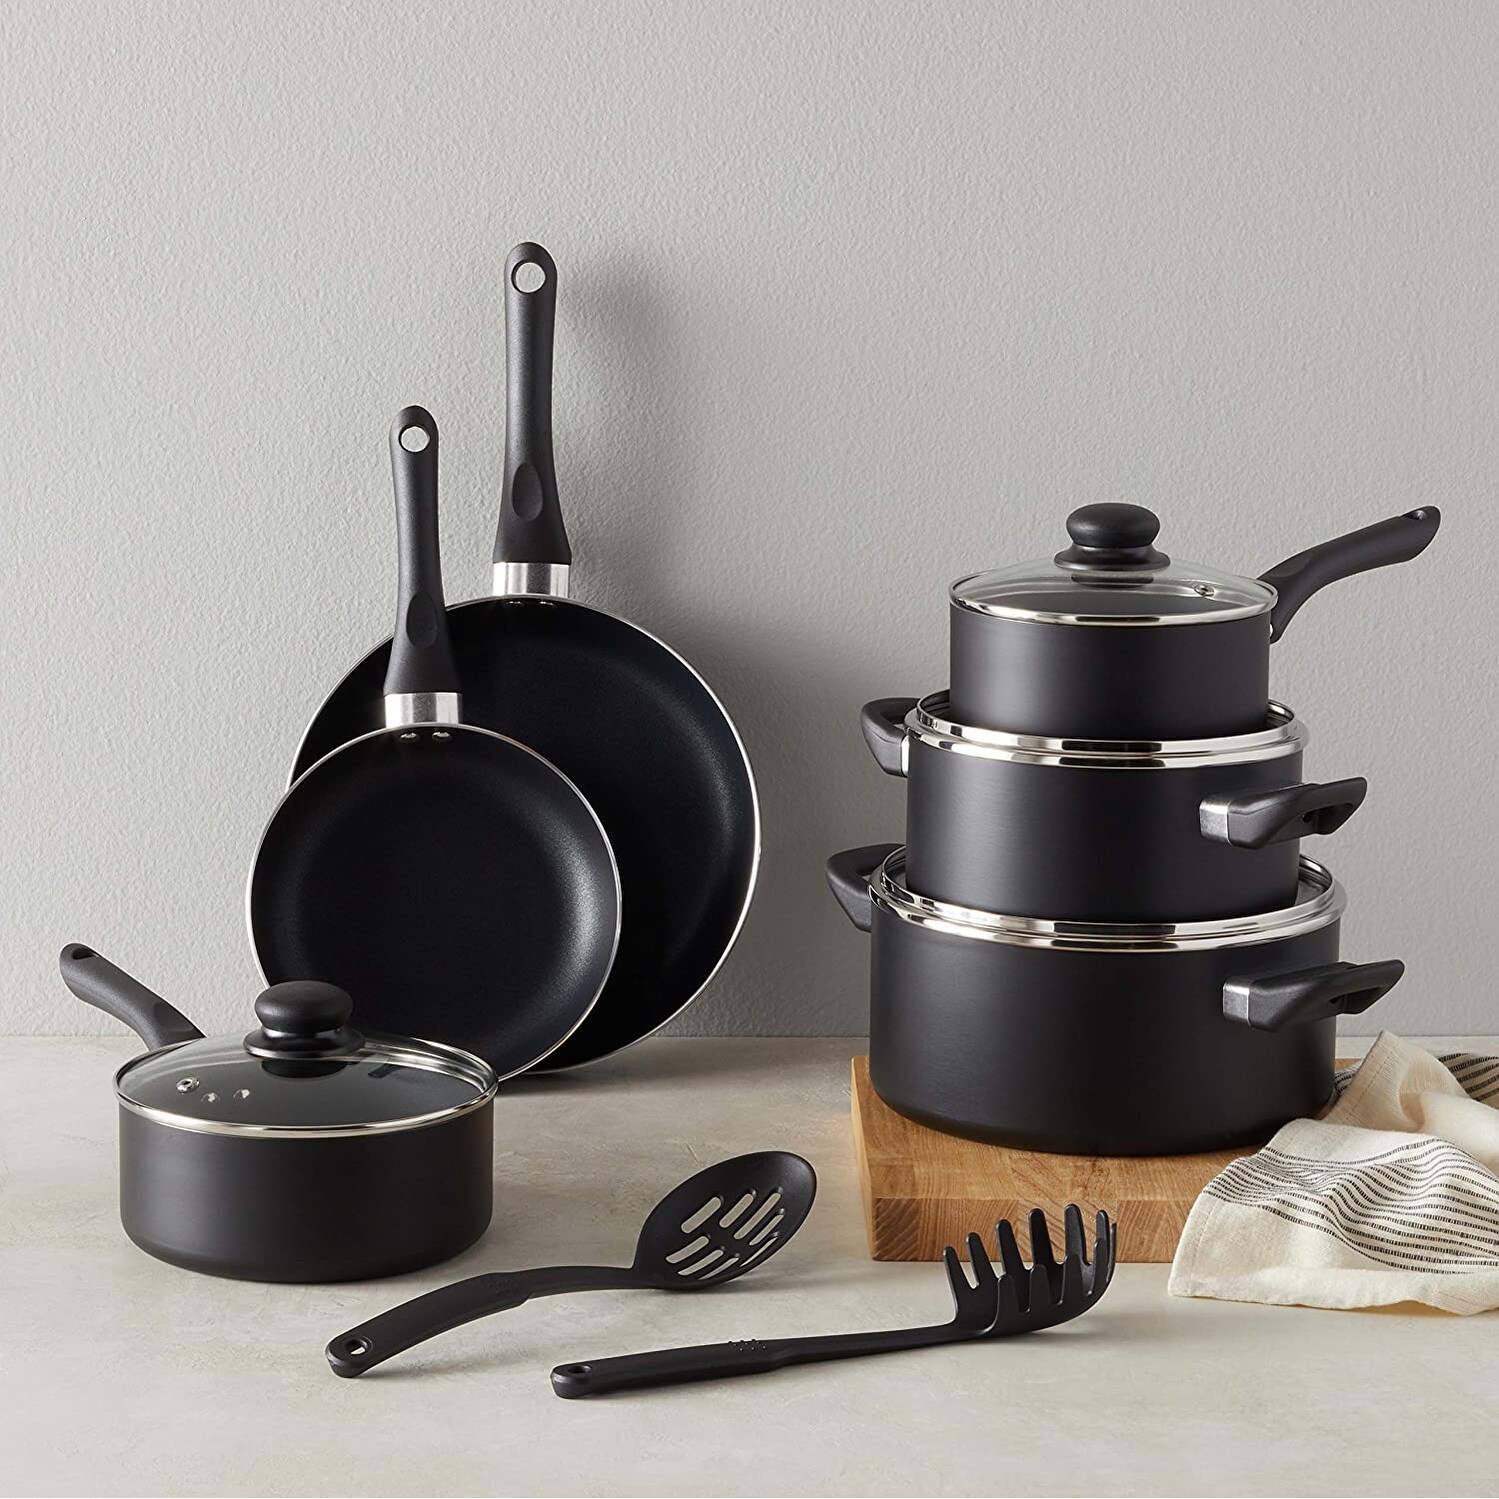 https://ak1.ostkcdn.com/images/products/is/images/direct/f59a73dbce71bed9a5fc325416b7c26aceb2bd72/Amazon-Basics-Non-Stick-Cookware-Set%2C-Pots-and-Pans---8-Piece-Set.jpg